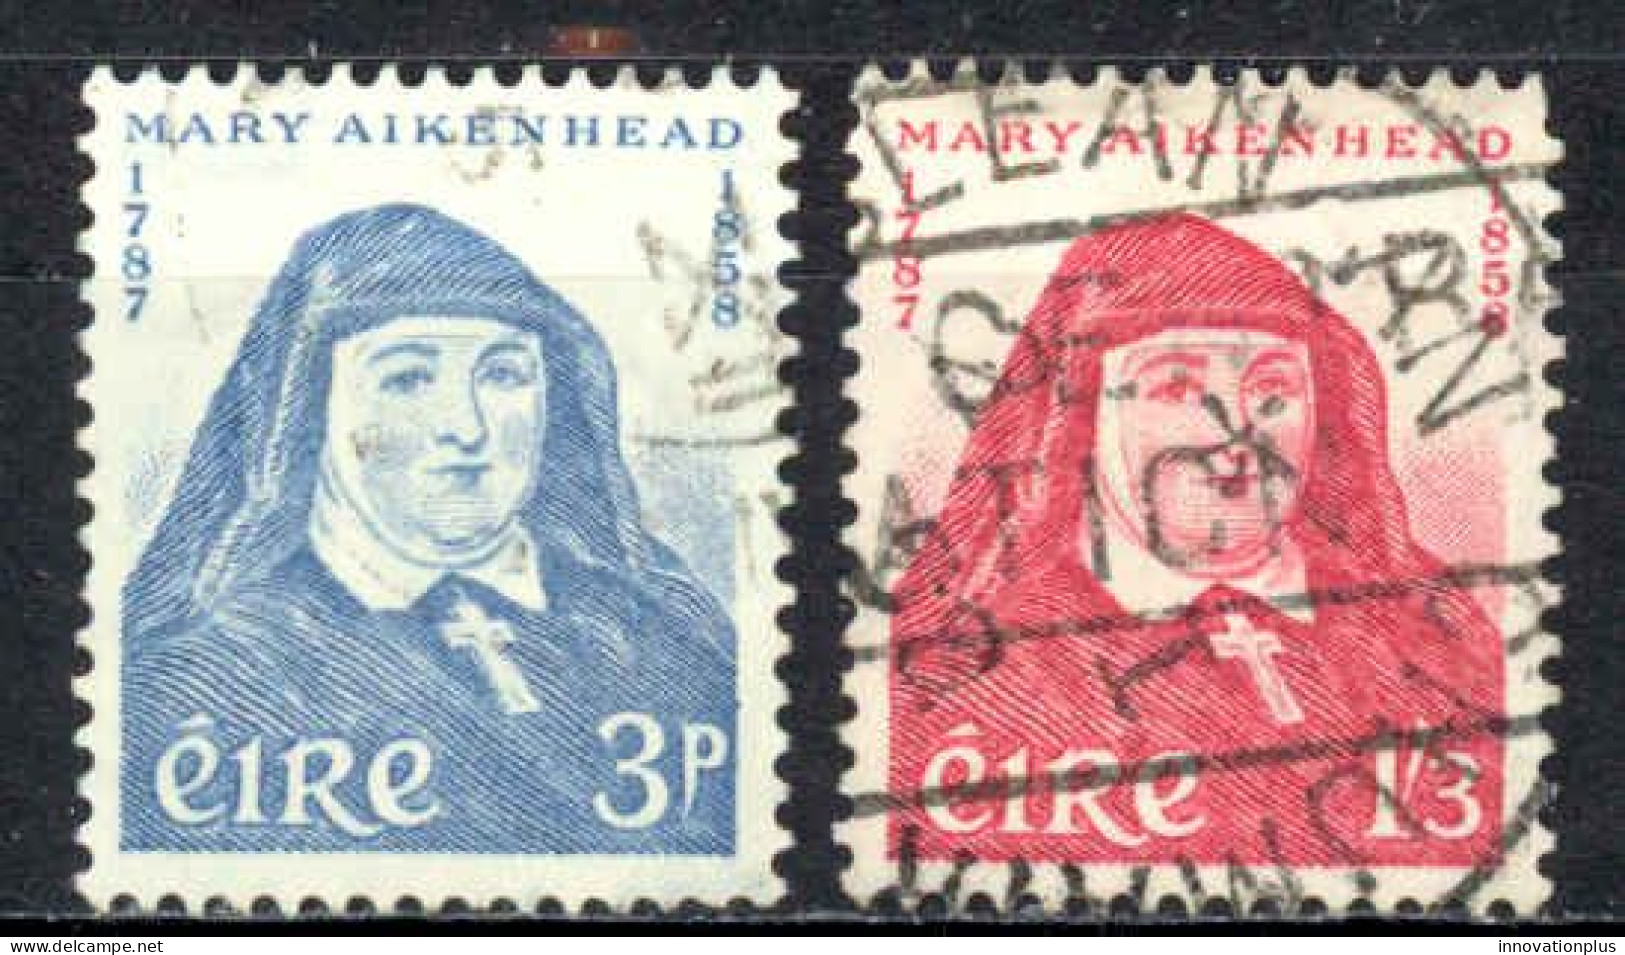 Ireland Sc# 167-168 Used 1958 Mother Mary Aikenhead - Used Stamps